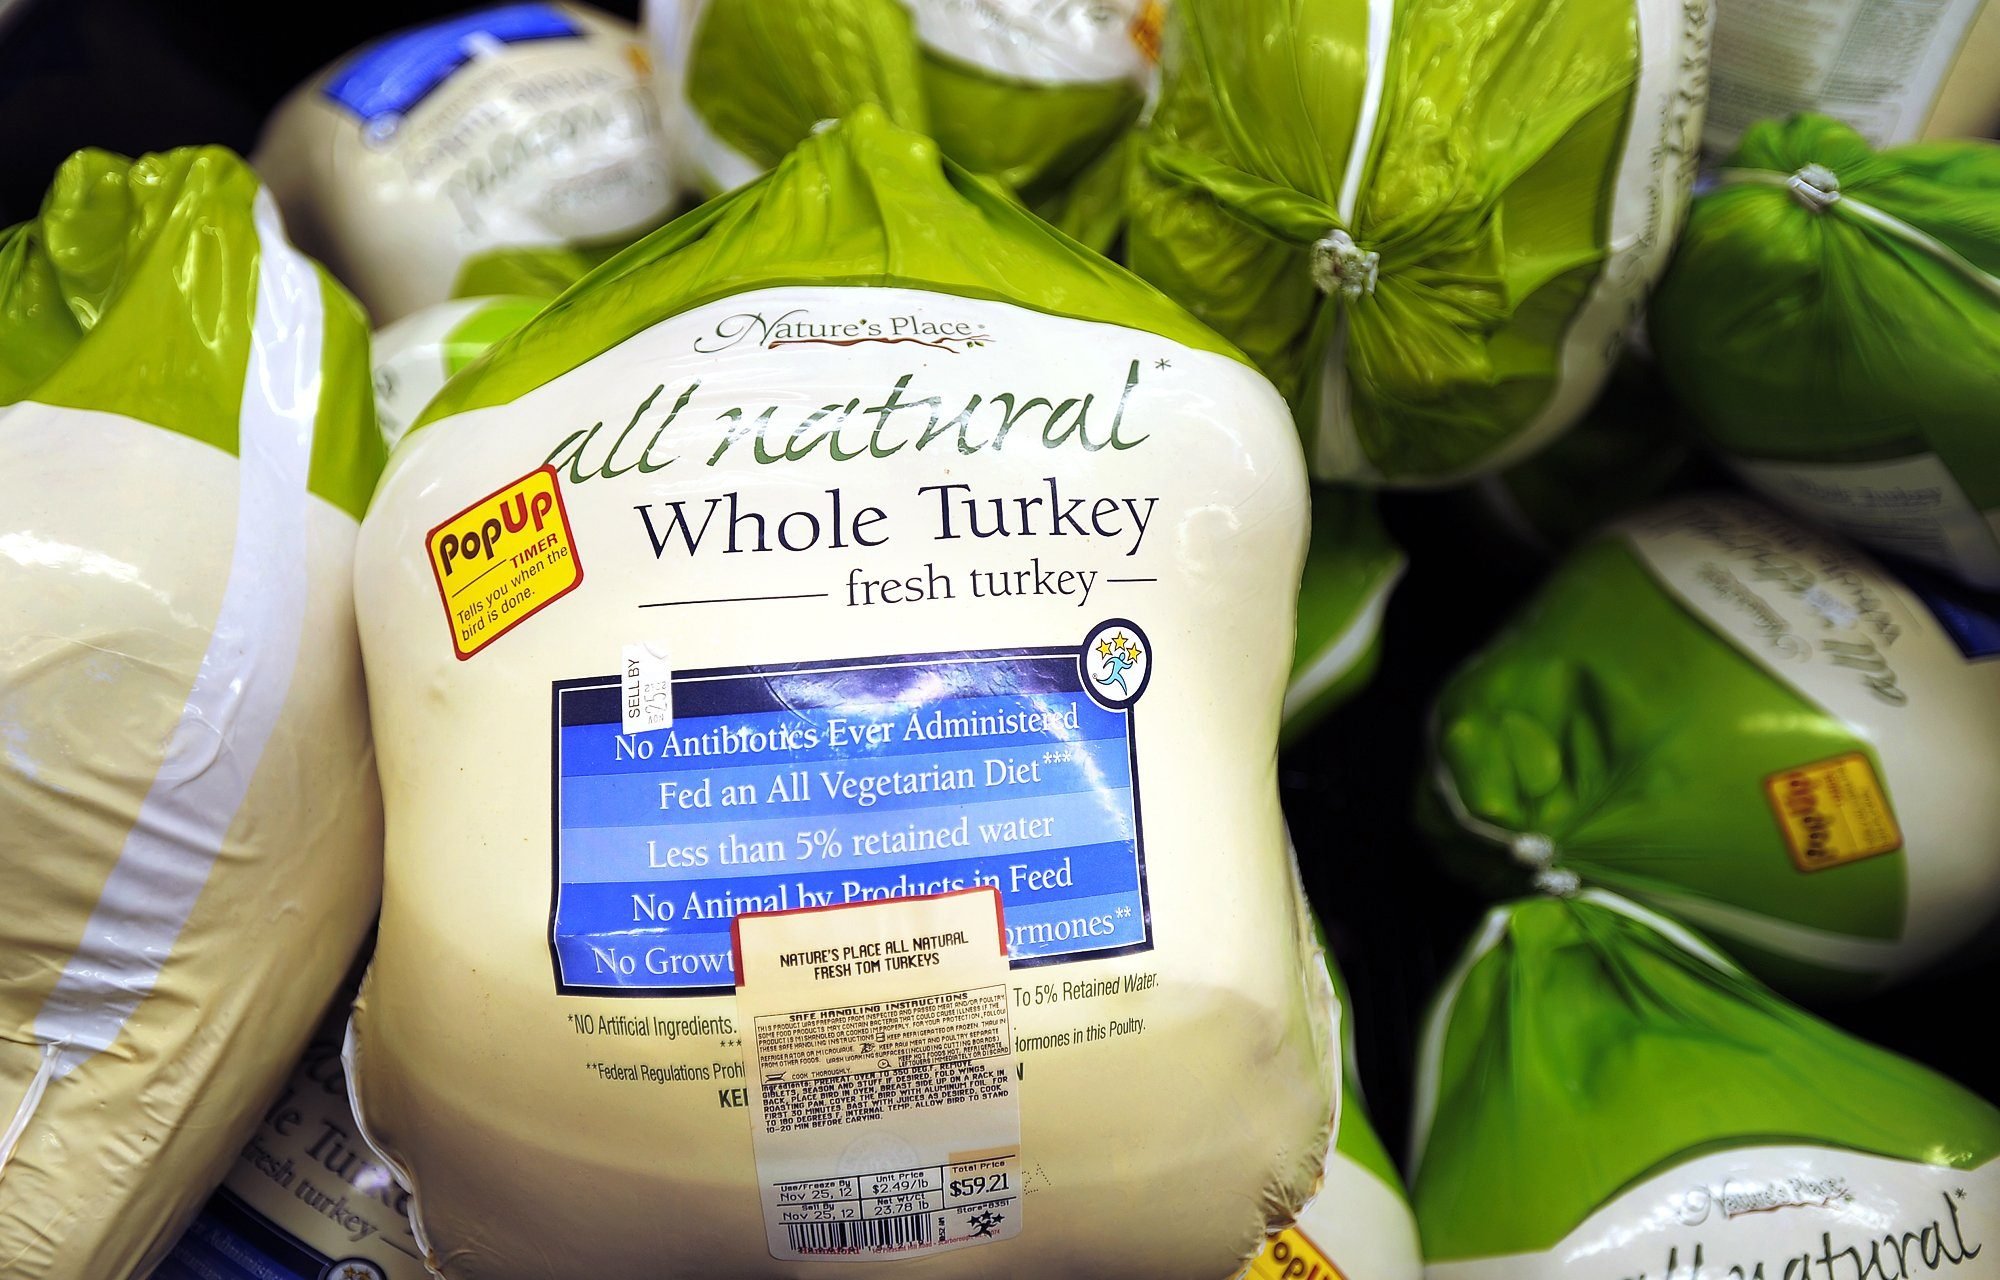 Safe ways to thaw and cook a frozen turkey - Farm and Dairy